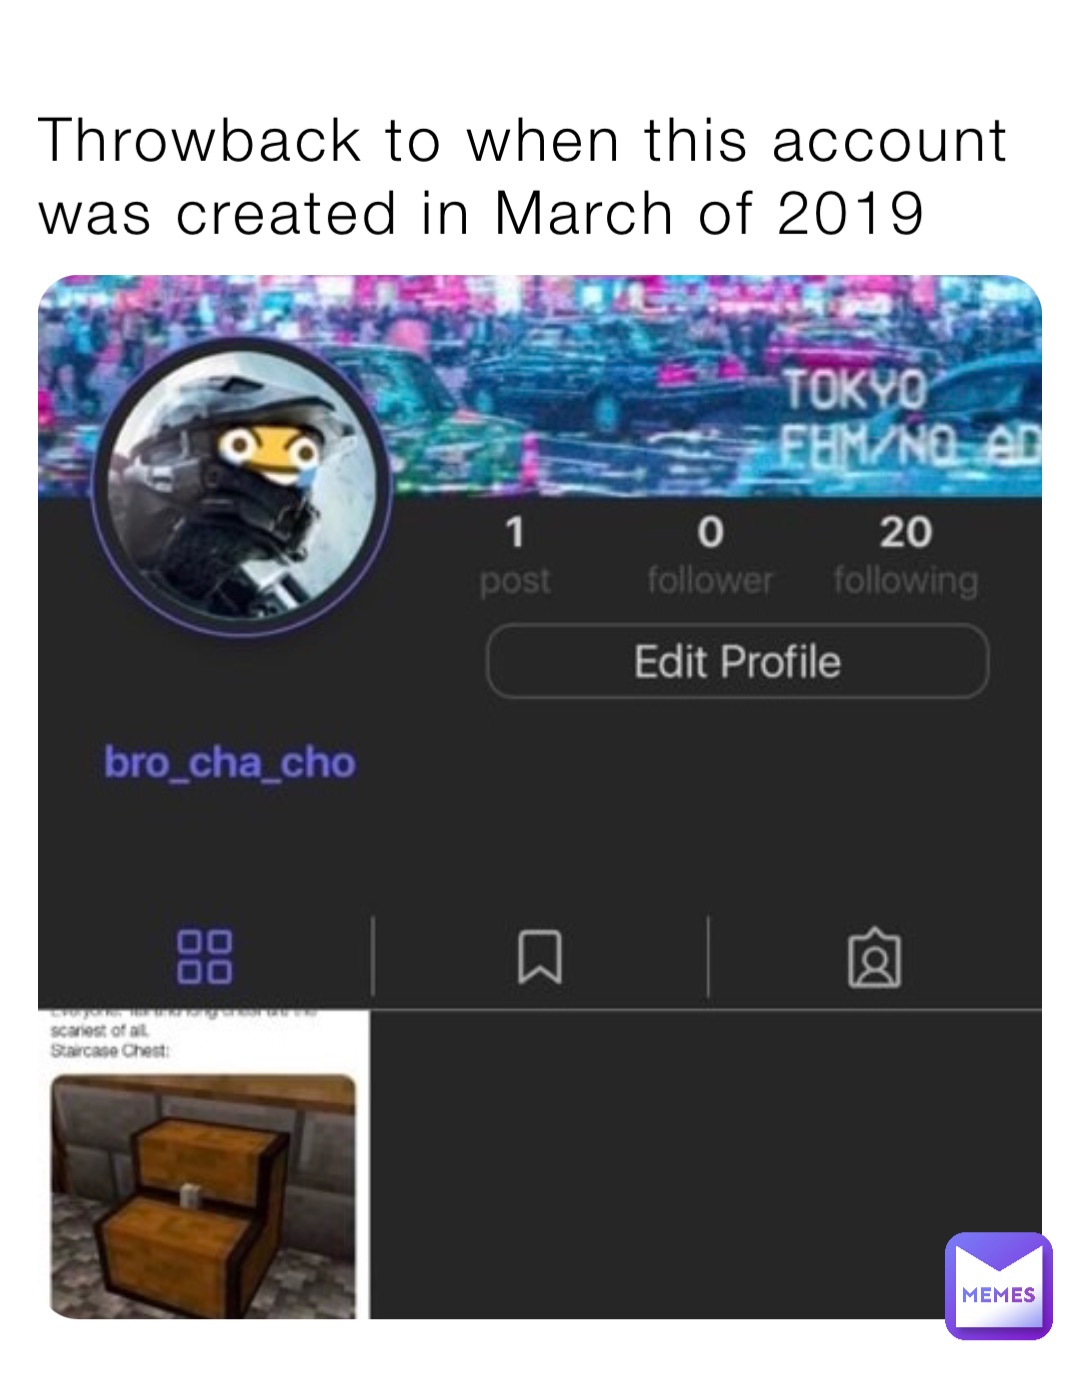 Throwback to when this account was created in March of 2019